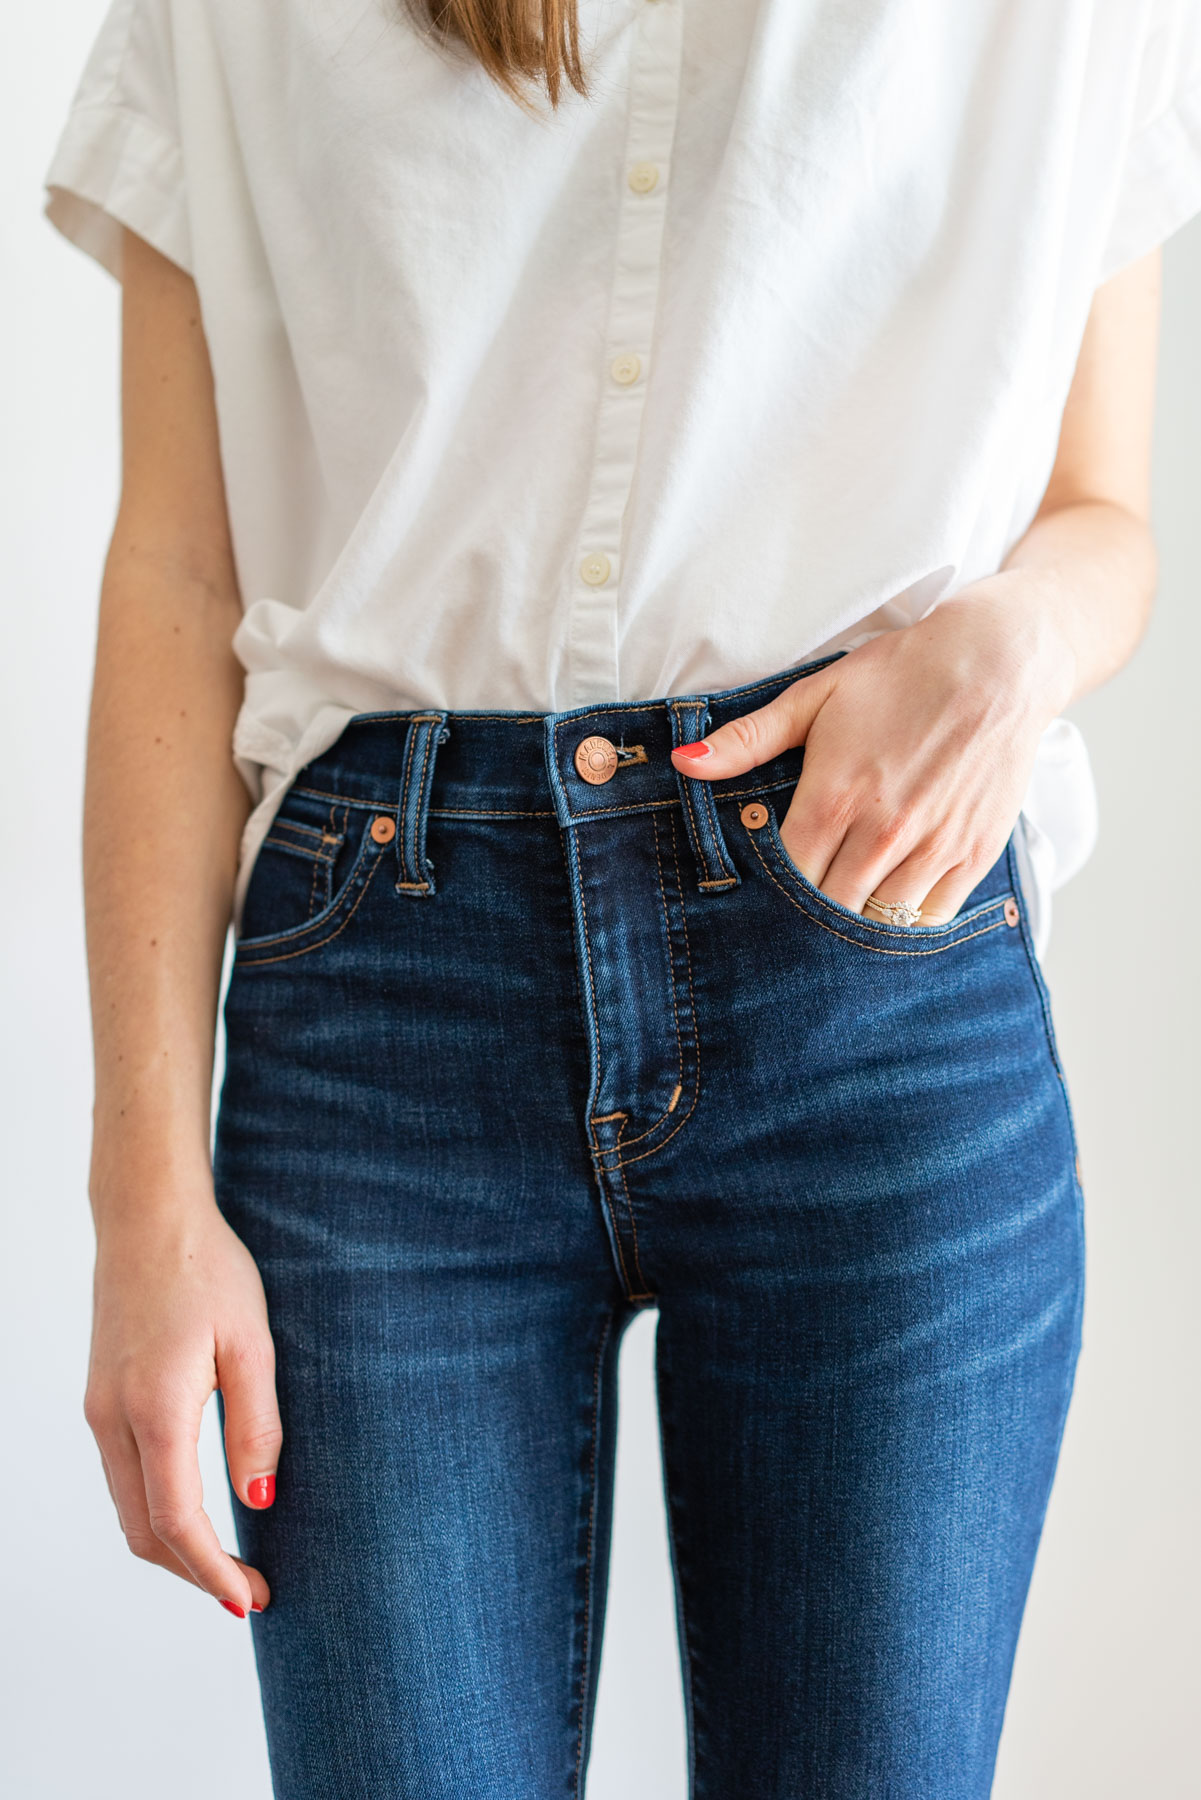 Woman modeling Madewell's dark Skinny jeans for a Madewell jeans review with a white button up shirt tied at the waist